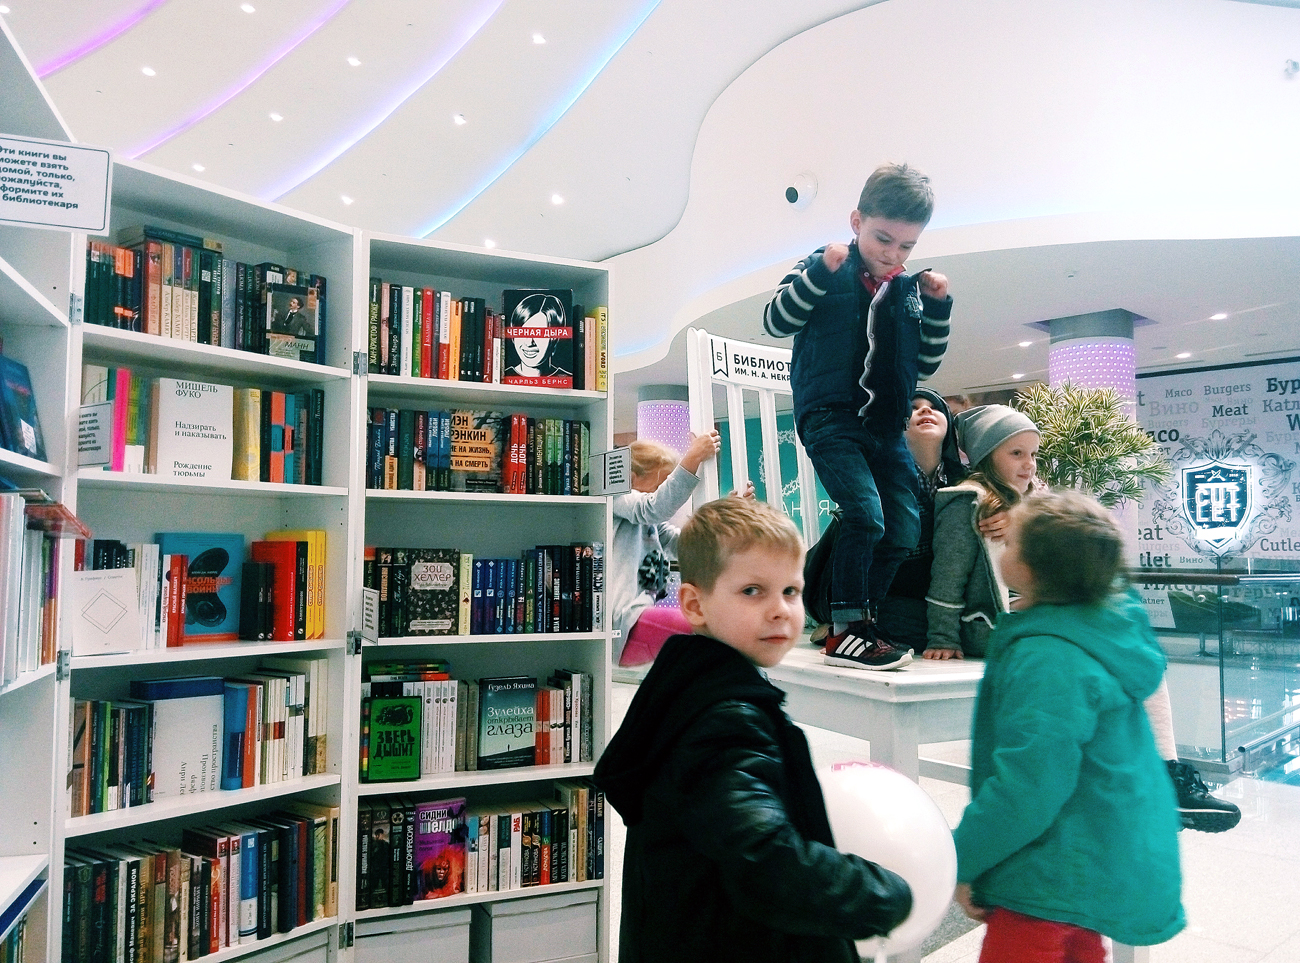 A mobile point of the Nekrasov library in the Oceania shopping and entertainment center in Moscow.